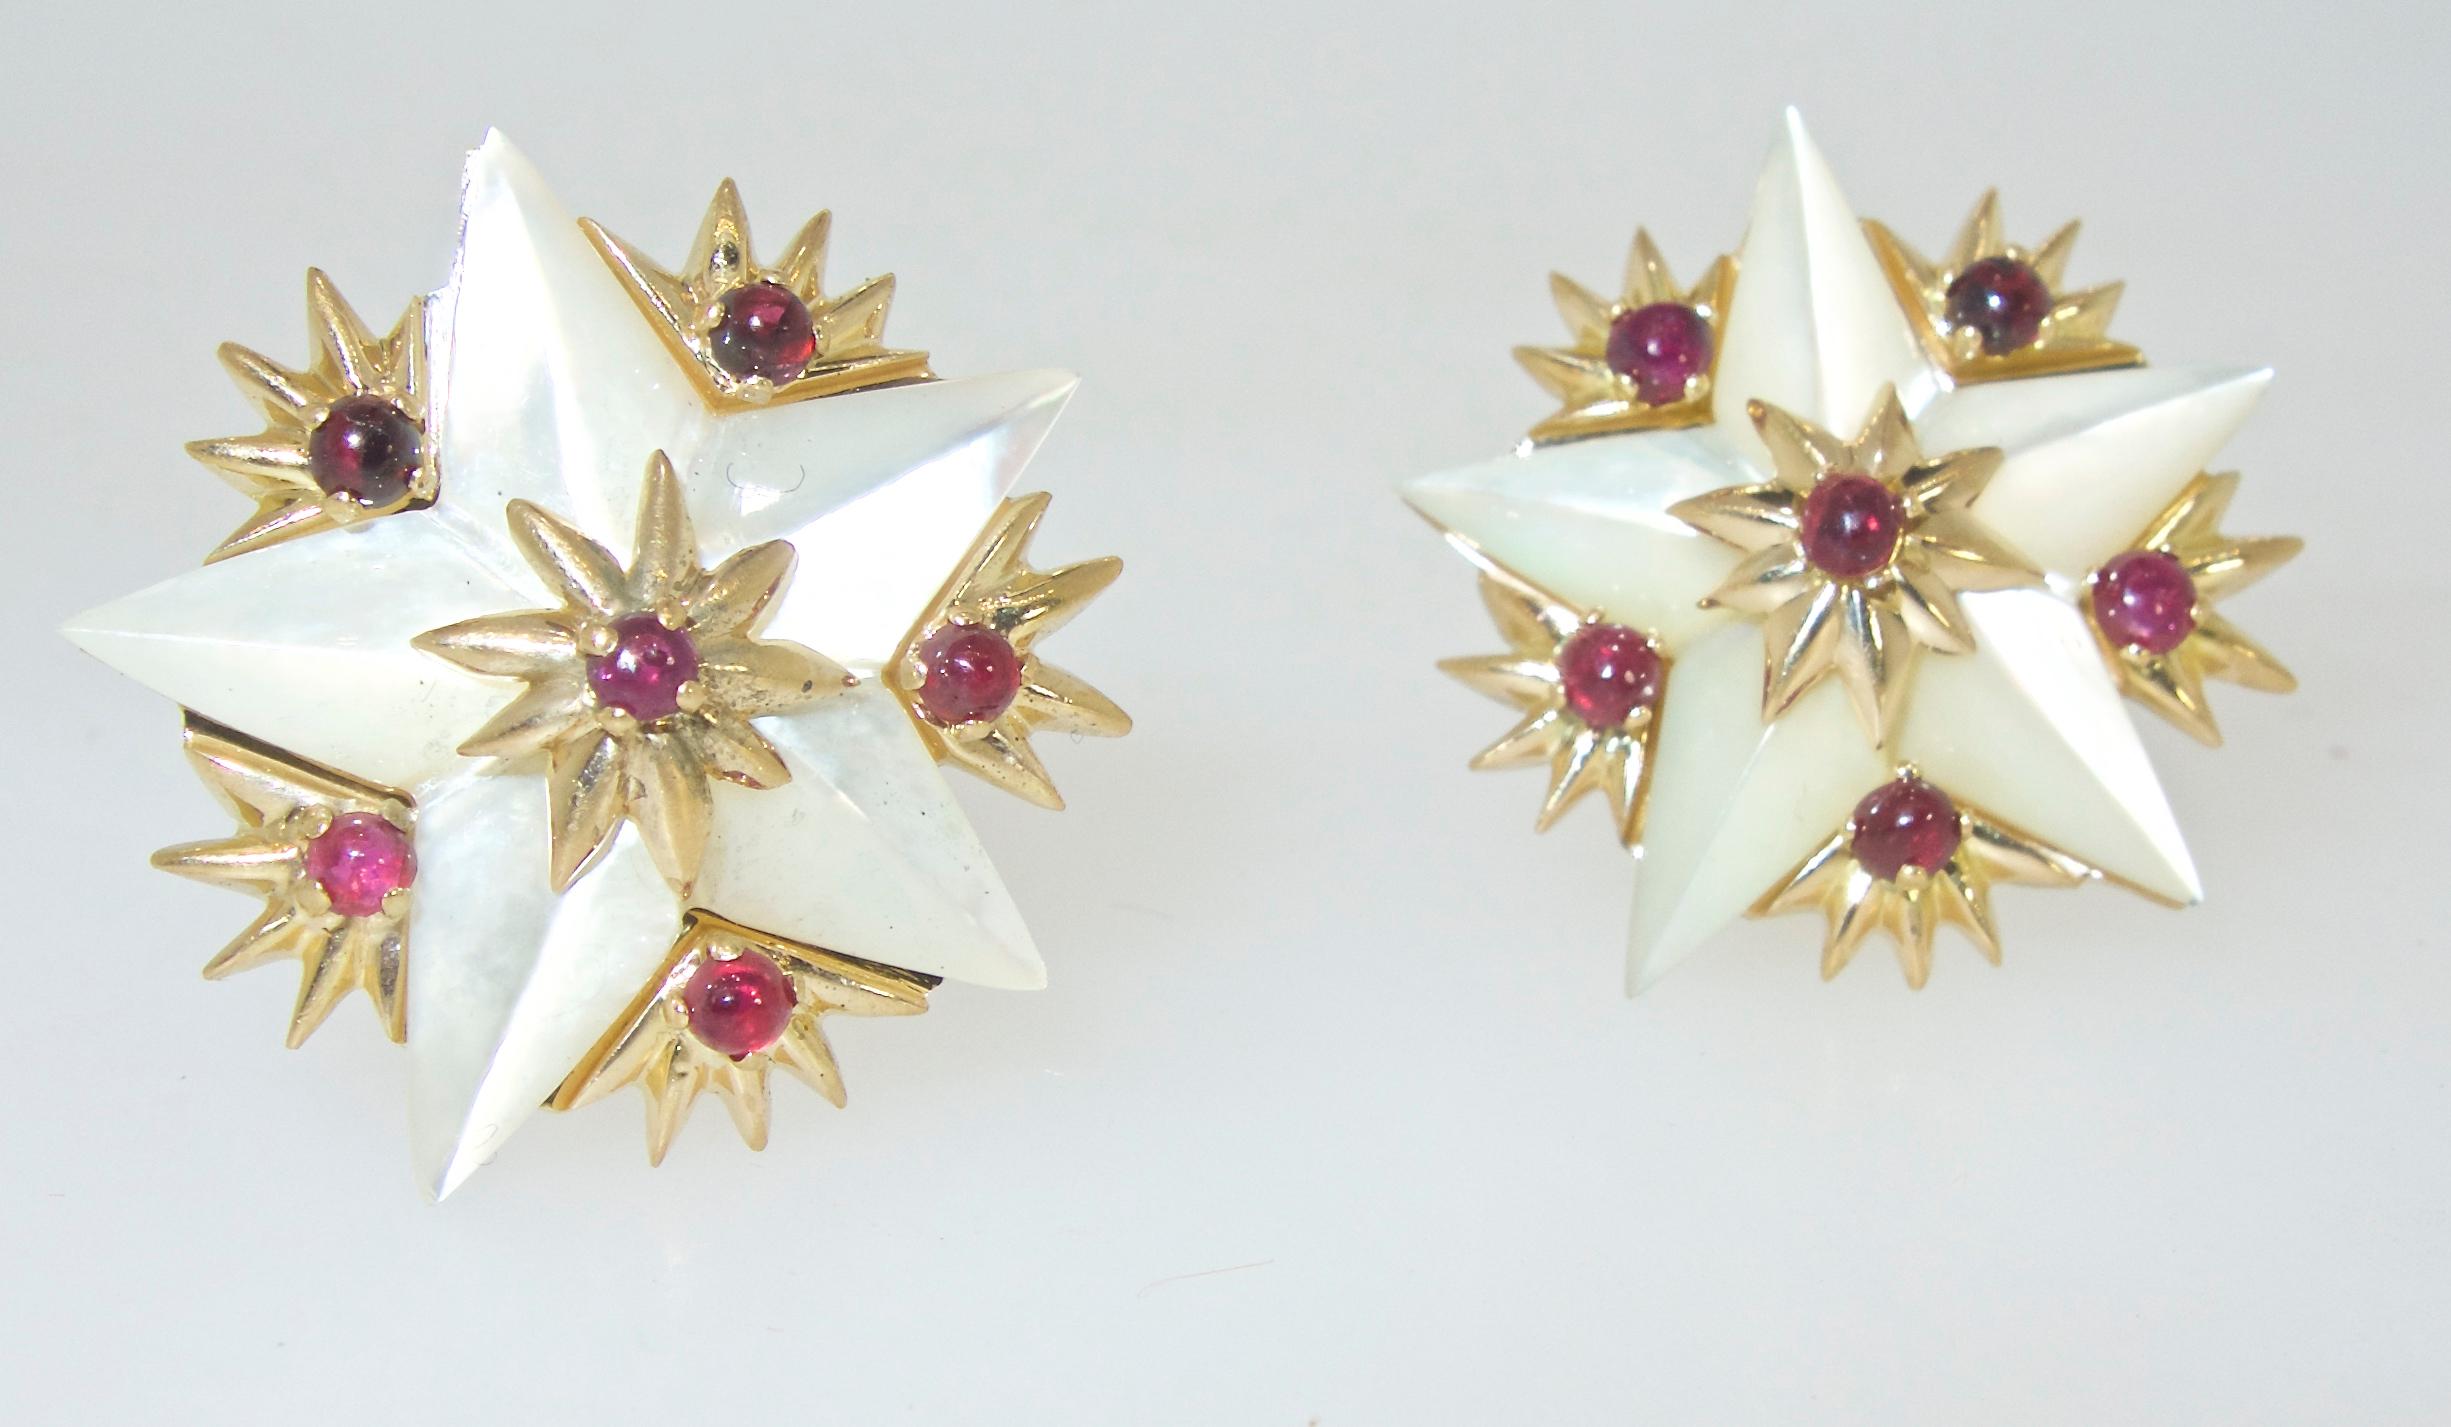 Jean Schlumberger for Tiffany & Co iconic star motif earrings in mother of pearl and with 12 natural bright red rubies.  These 18K earrings with French hallmarks and signed on the verso Schlumberger for Tiffany are .75 inches in diameter.  In fine